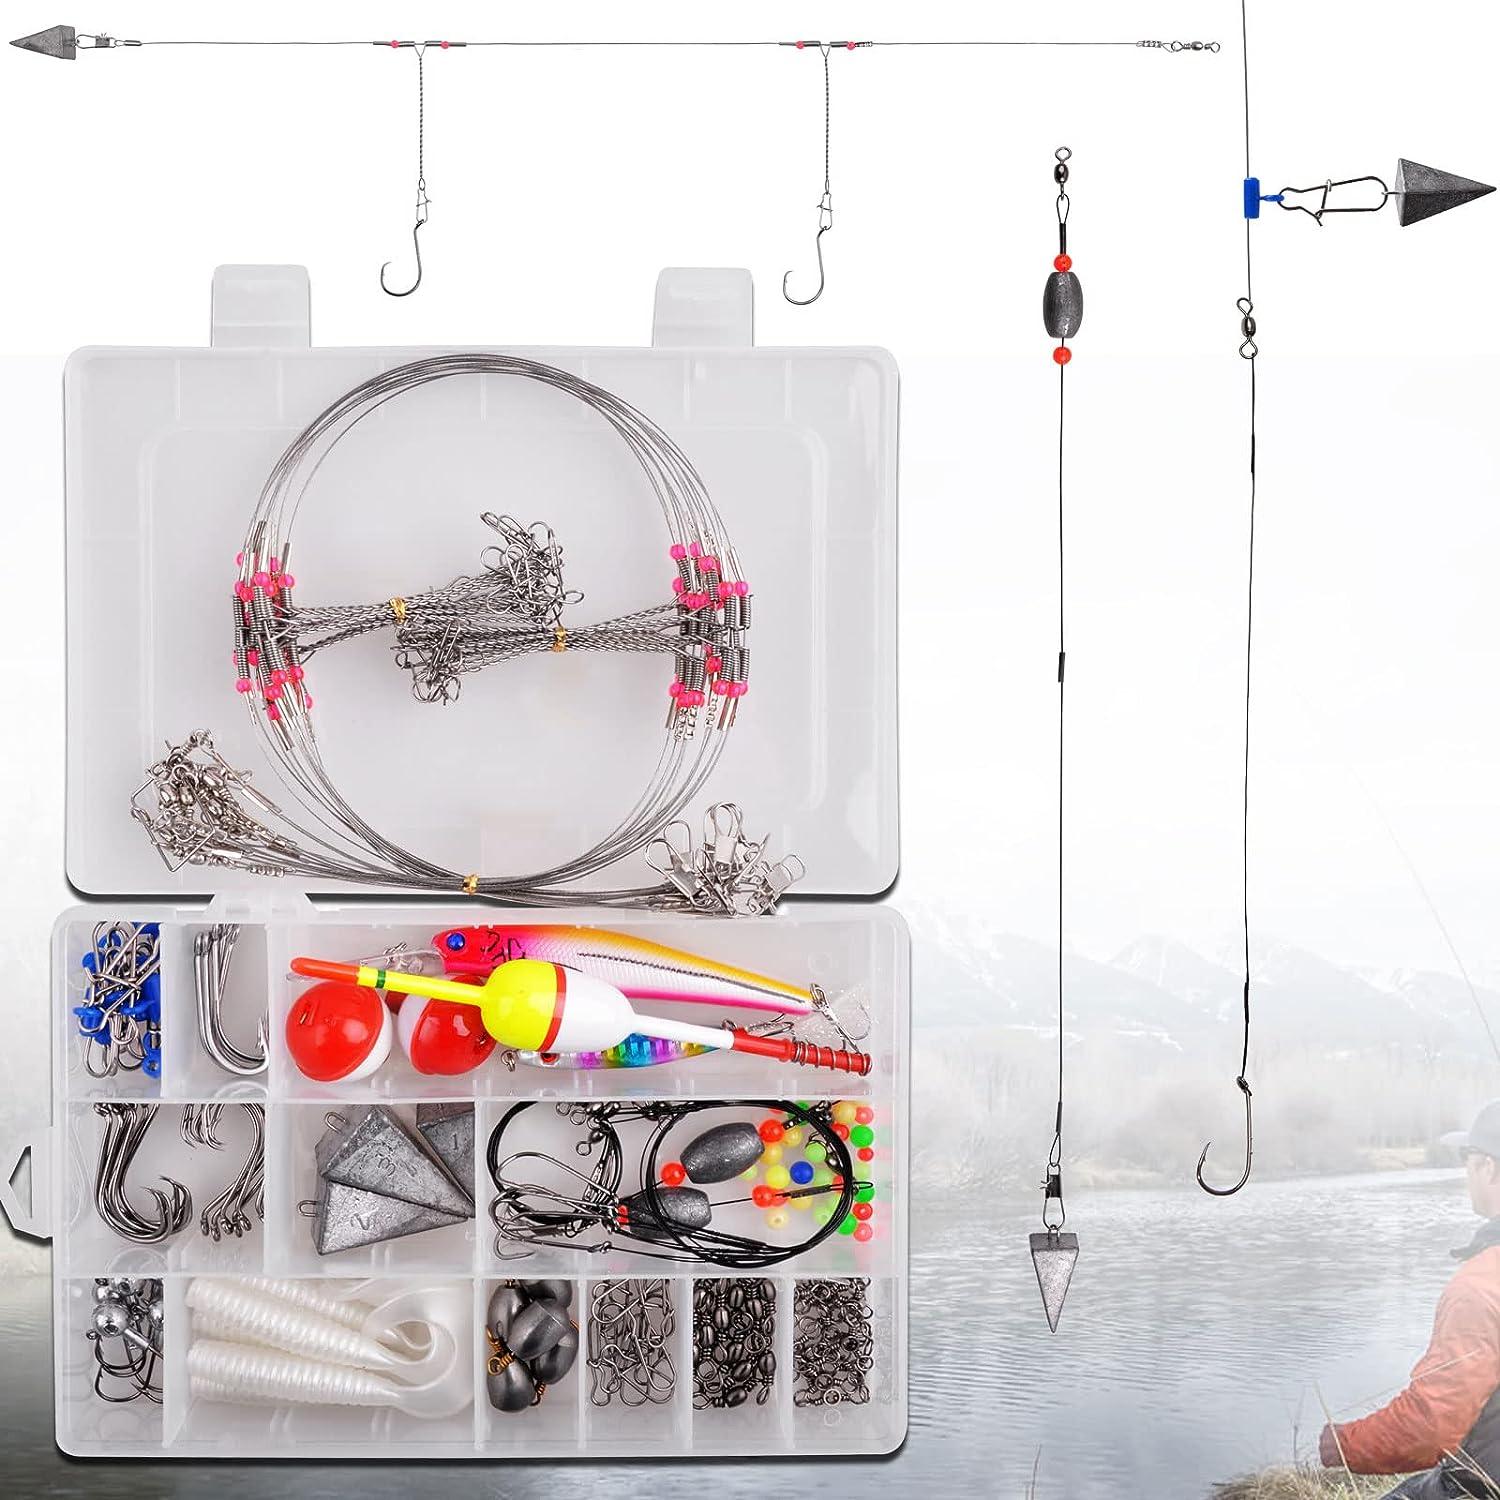 Saltwater Fishing Rigs Kit, Surf Fishing Gear and Equipment Tackle Box with  Pyramid Sinker Weight Fishing Hooks Swivels Finder Rigs Pompano Rig for